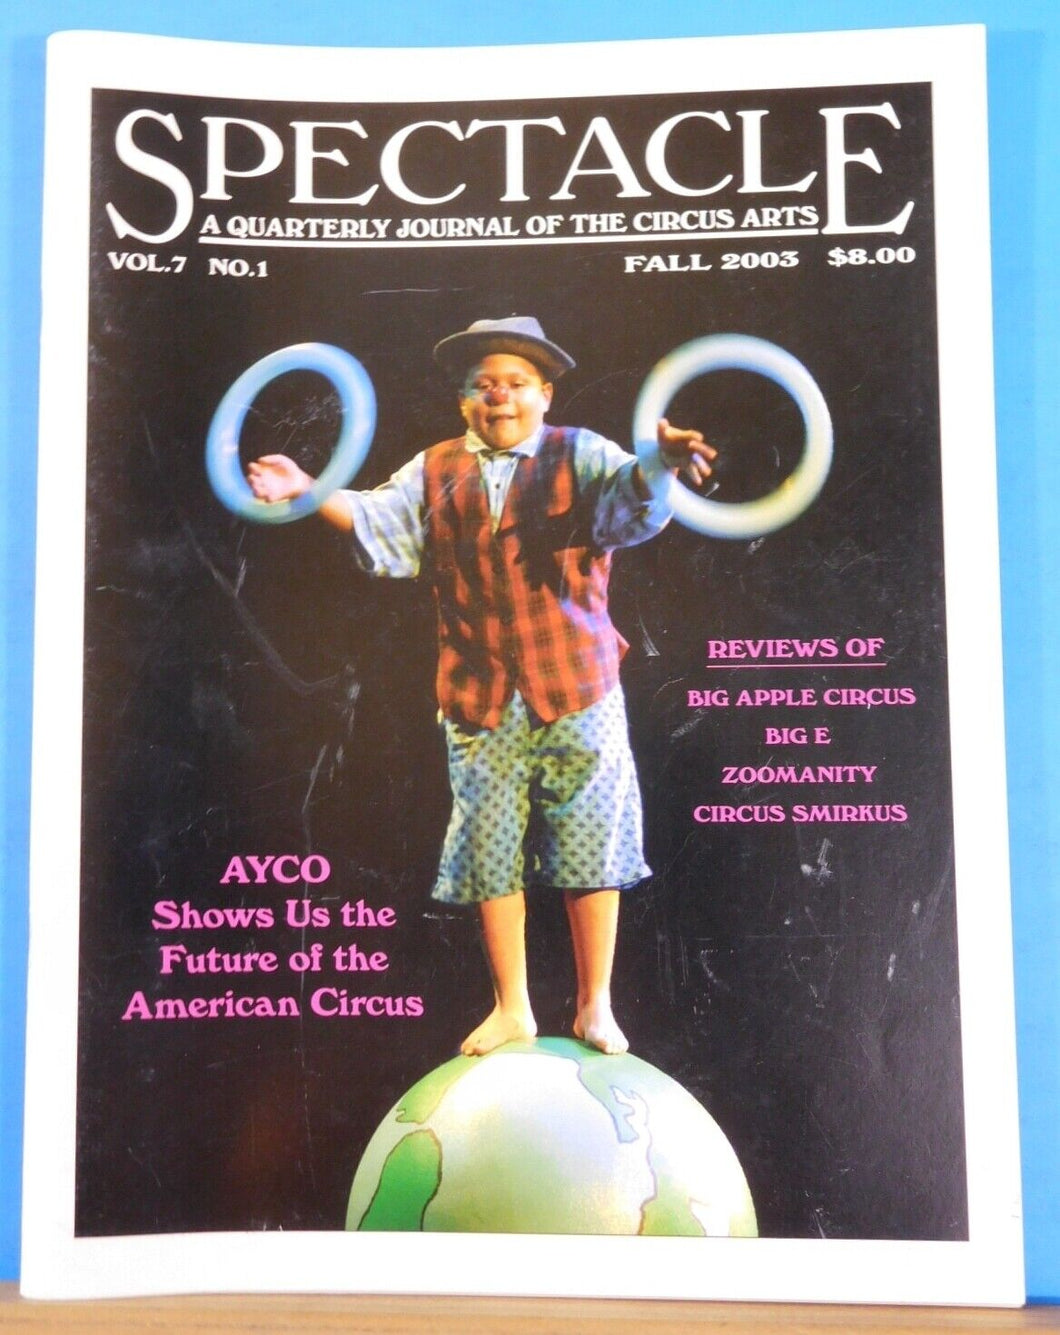 Spectacle 2003 Fall Quarterly Journal of the Circus Arts